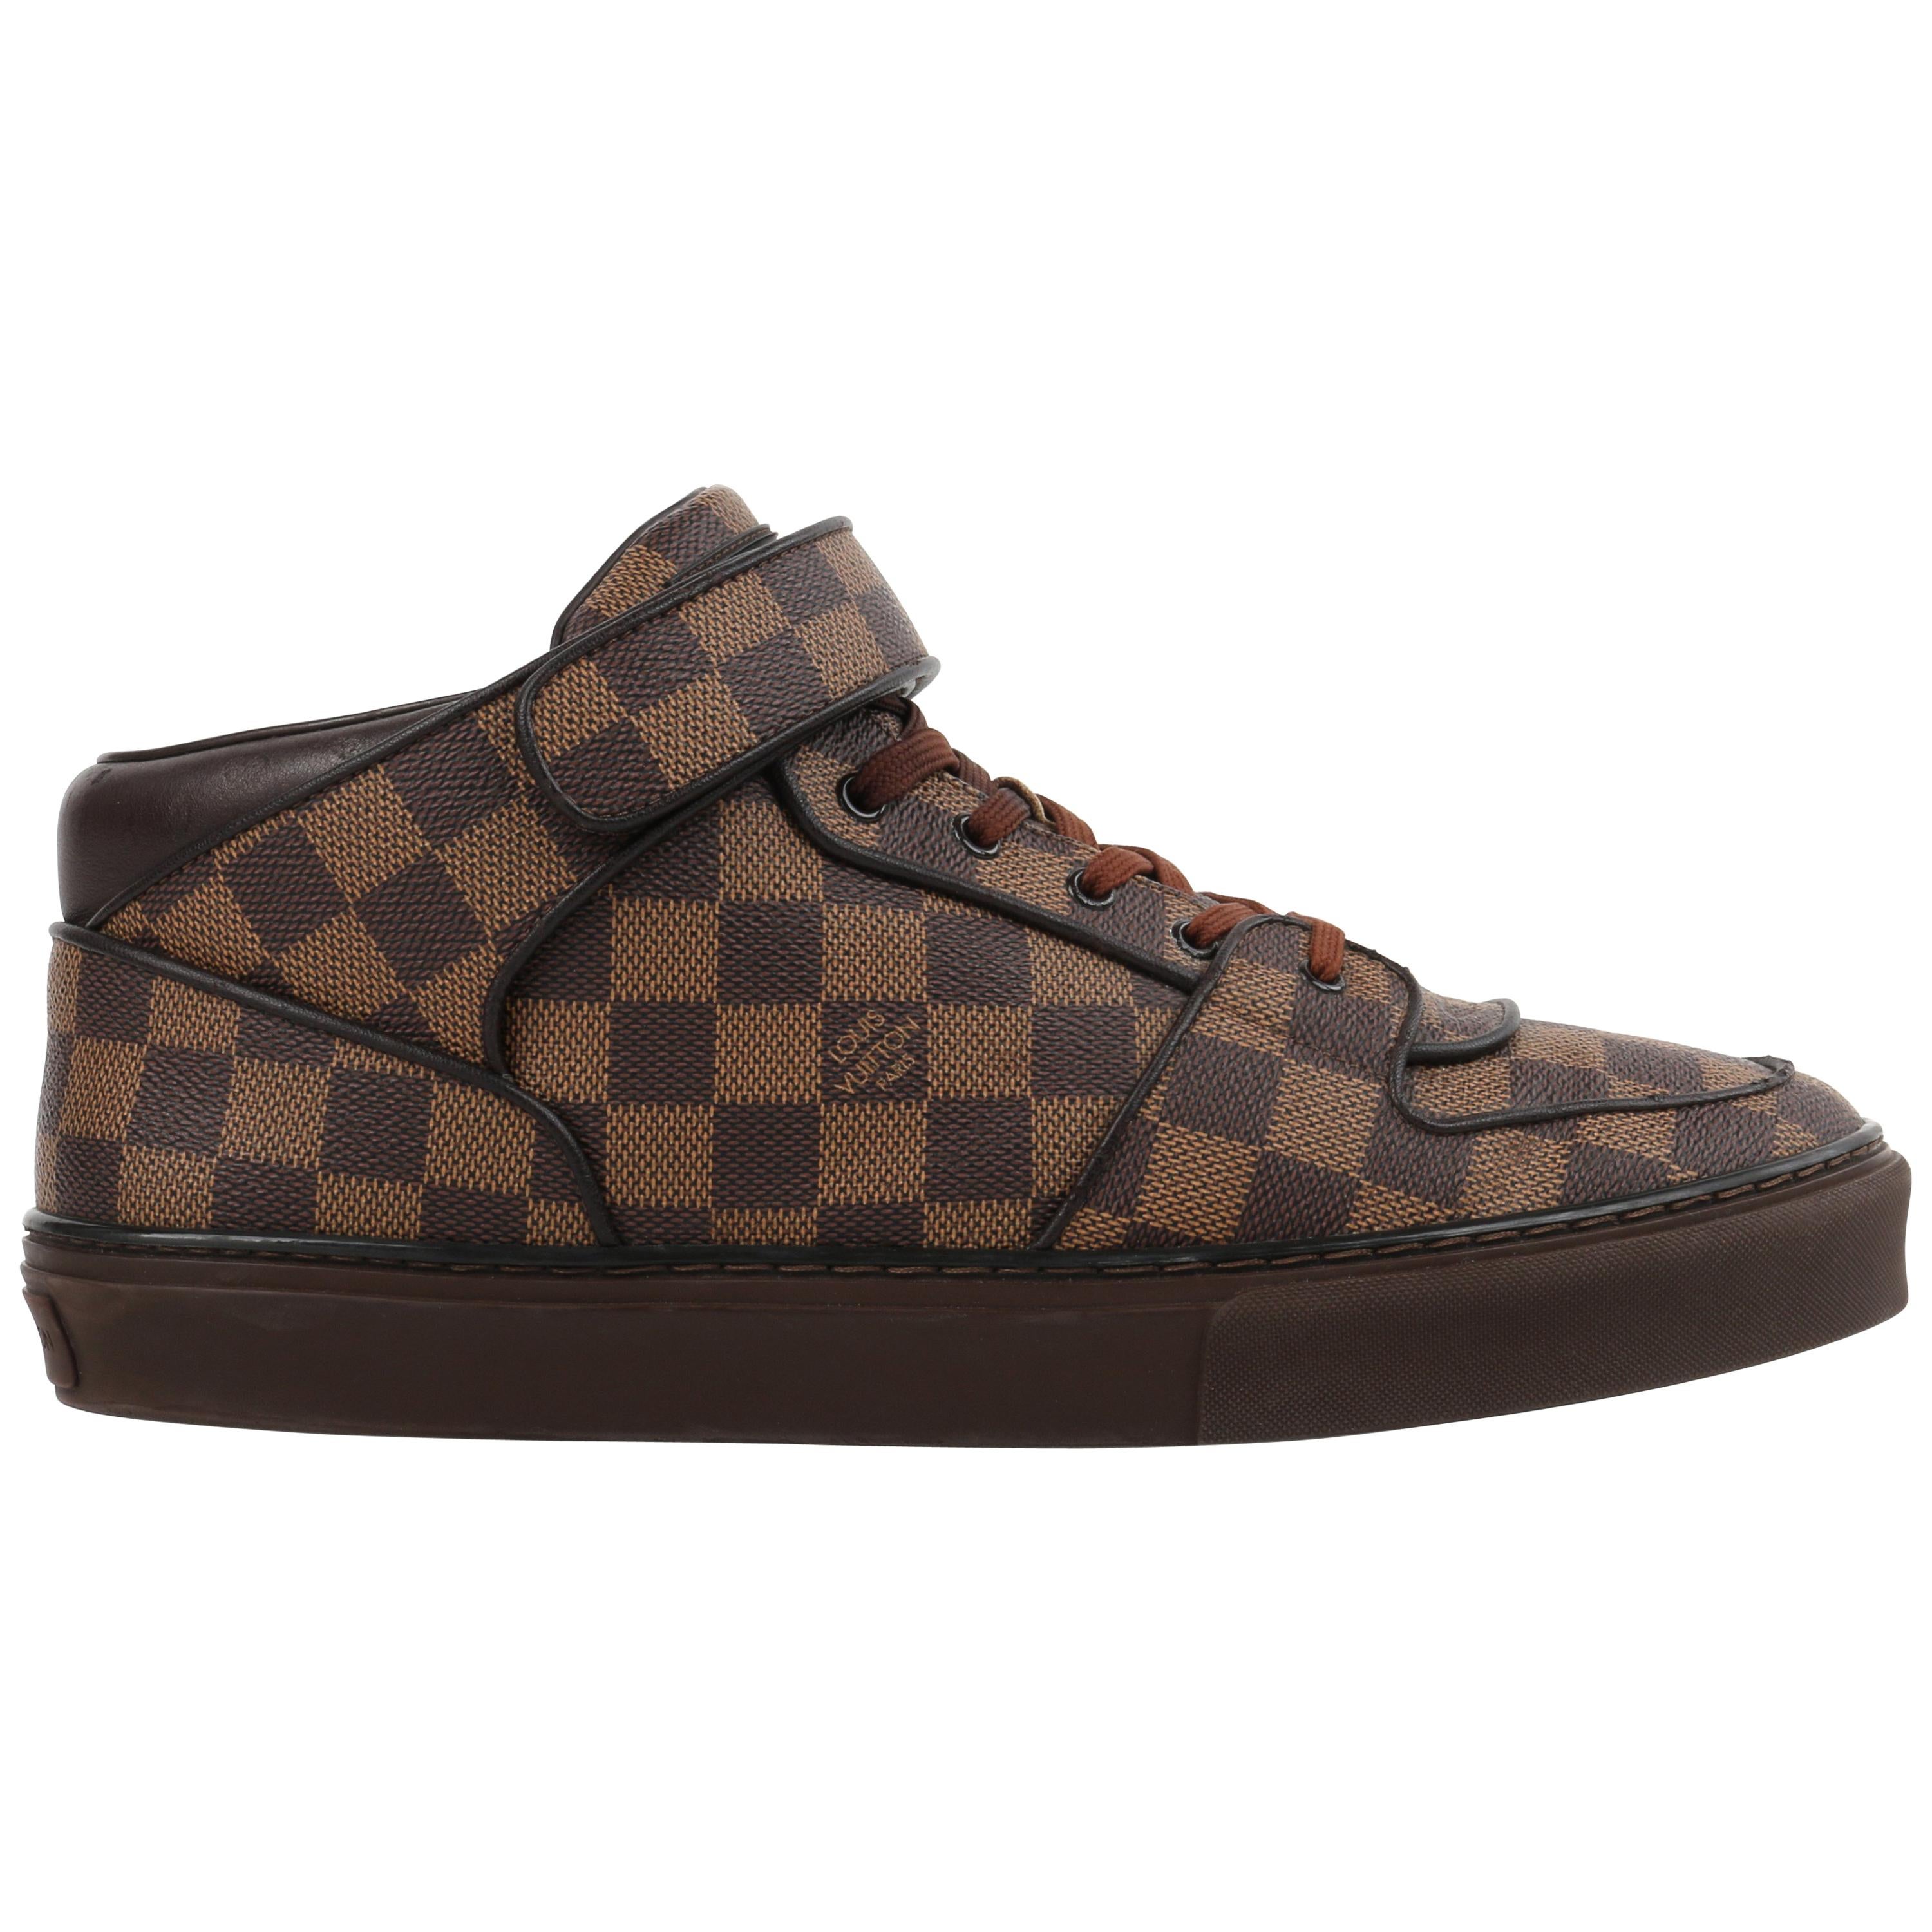 Louis Vuitton Damier Ebene Canvas And Brown Leather Lace Up High Top  Sneakers Size 40 Louis Vuitton